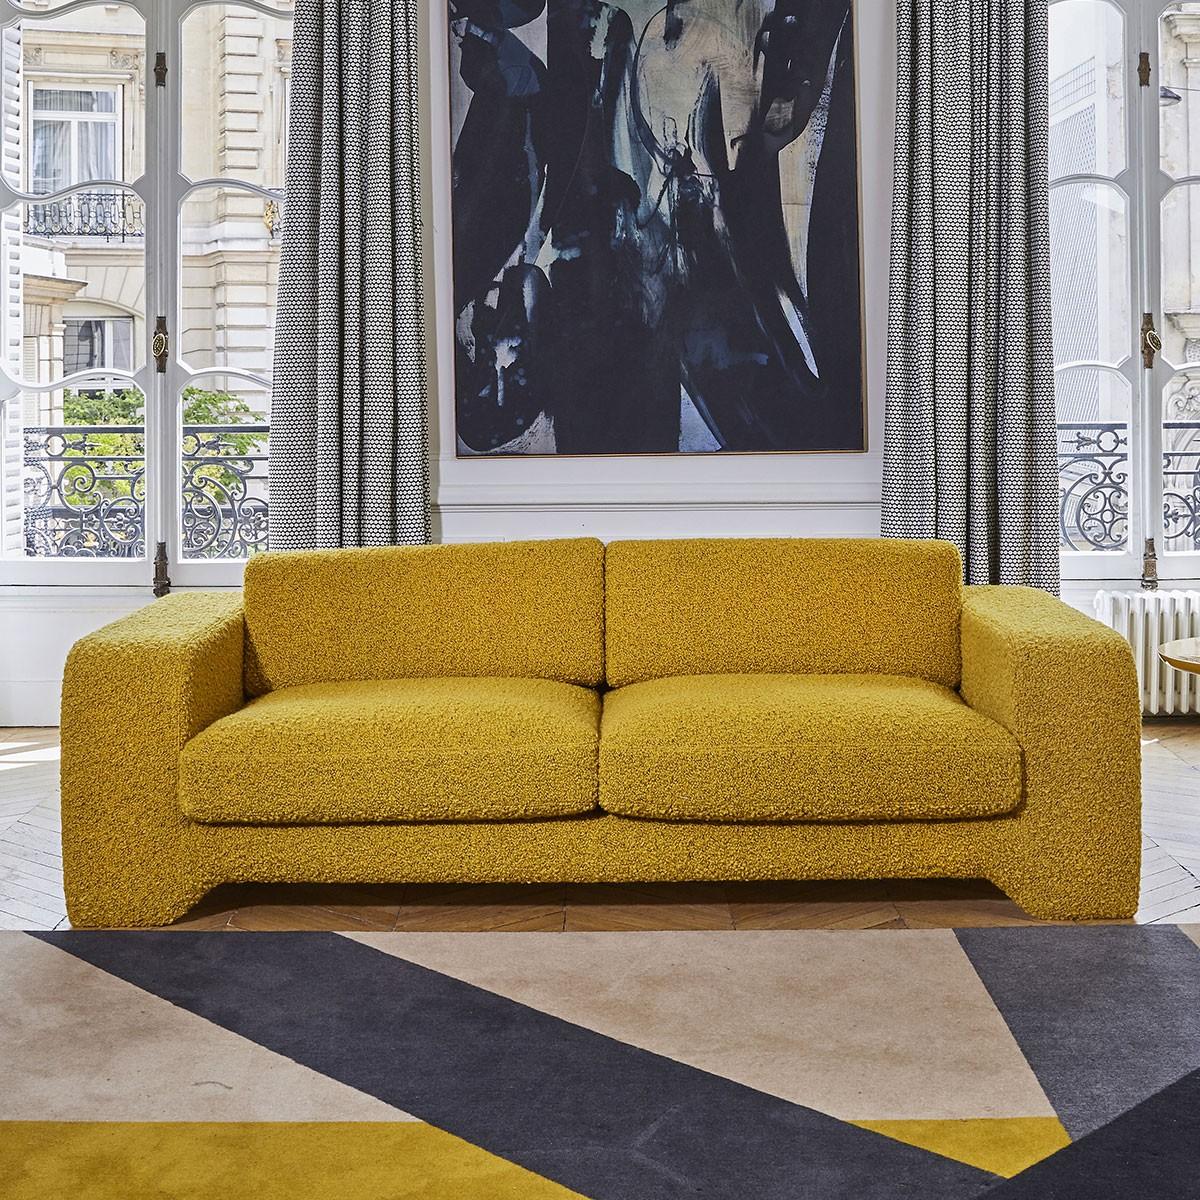 Popus Editions Giovanna 2.5 seater sofa in pink Como velvet upholstery.

Giovanna is a sofa with a strong profile. A sober, plush line, with this famous detail that changes everything, so as not to forget its strength of character and this